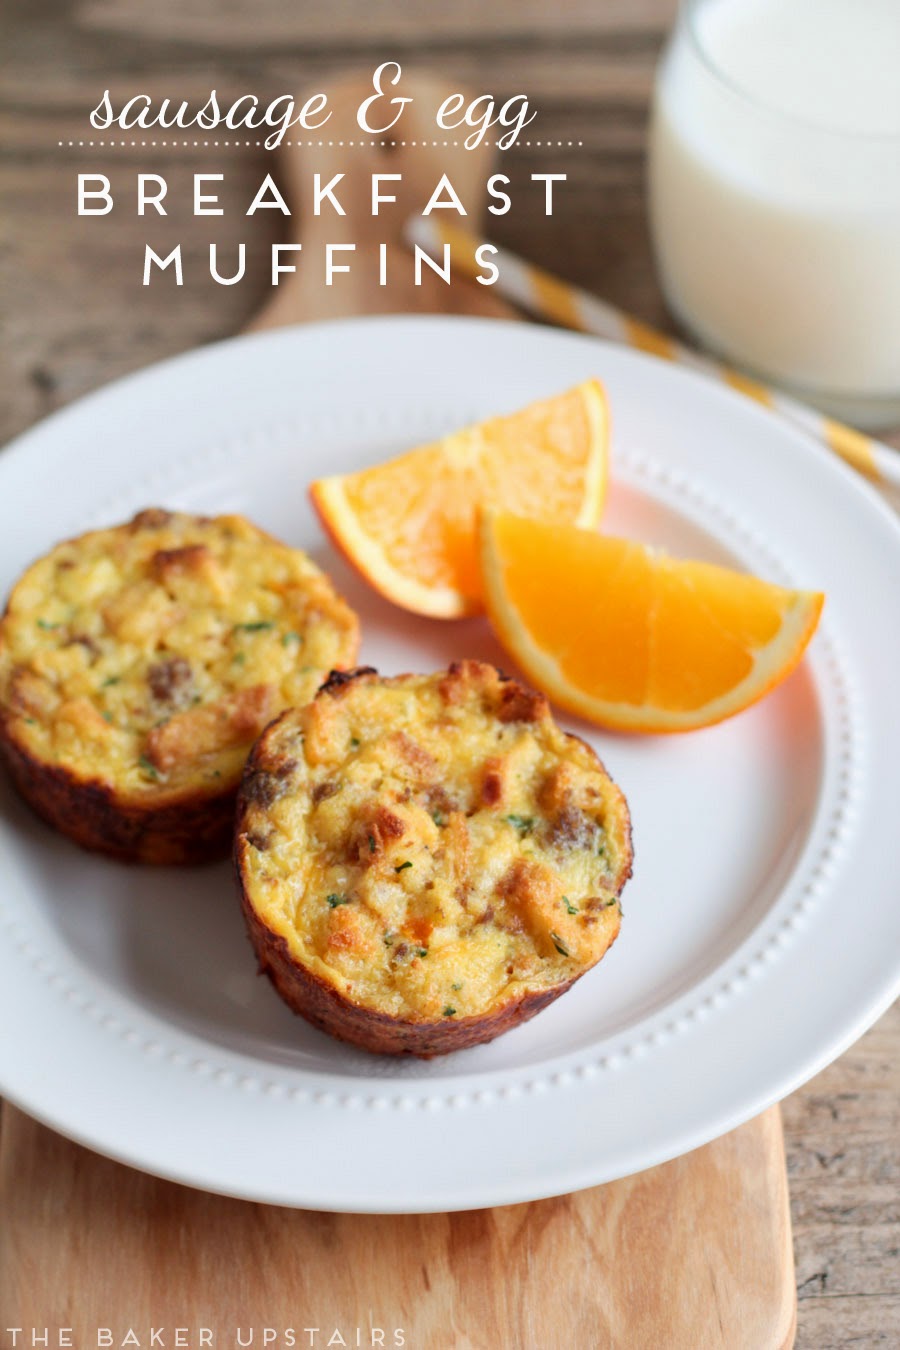 These sausage and egg breakfast muffins are so savory and delicious, and perfect for an easy on the go breakfast!